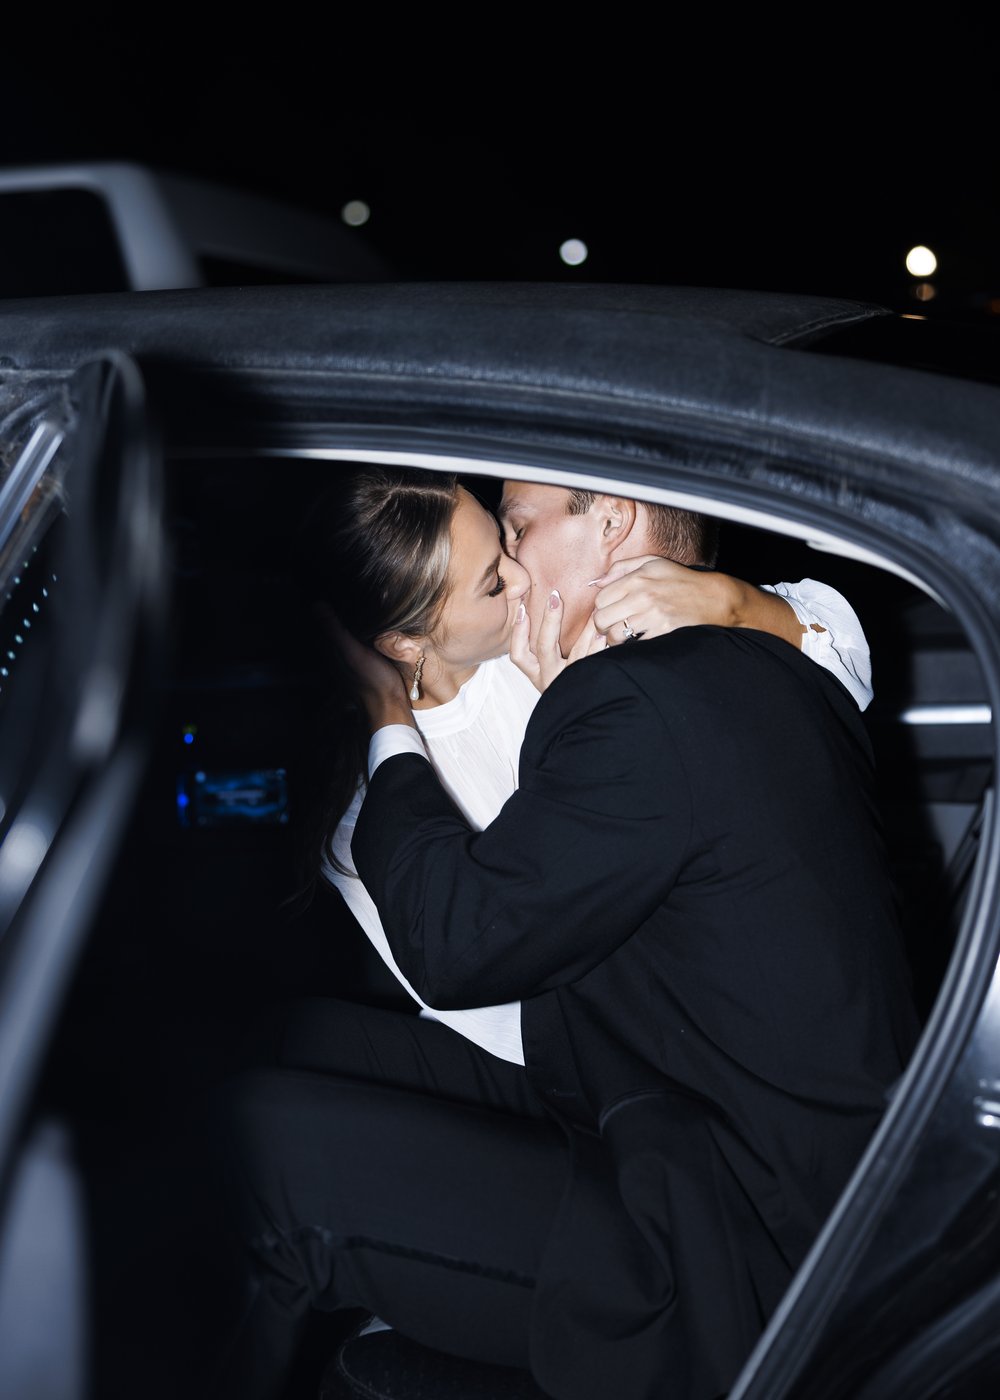  Dark wedding lighting and how to capture the moment by using flash with Savanna Richardson Photography. bride and groom #SavannaRichardsonPhotography #SavannaRichardsonTips #WeddingTips #PhotographyTips #weddingrecepiton #flashphotography 